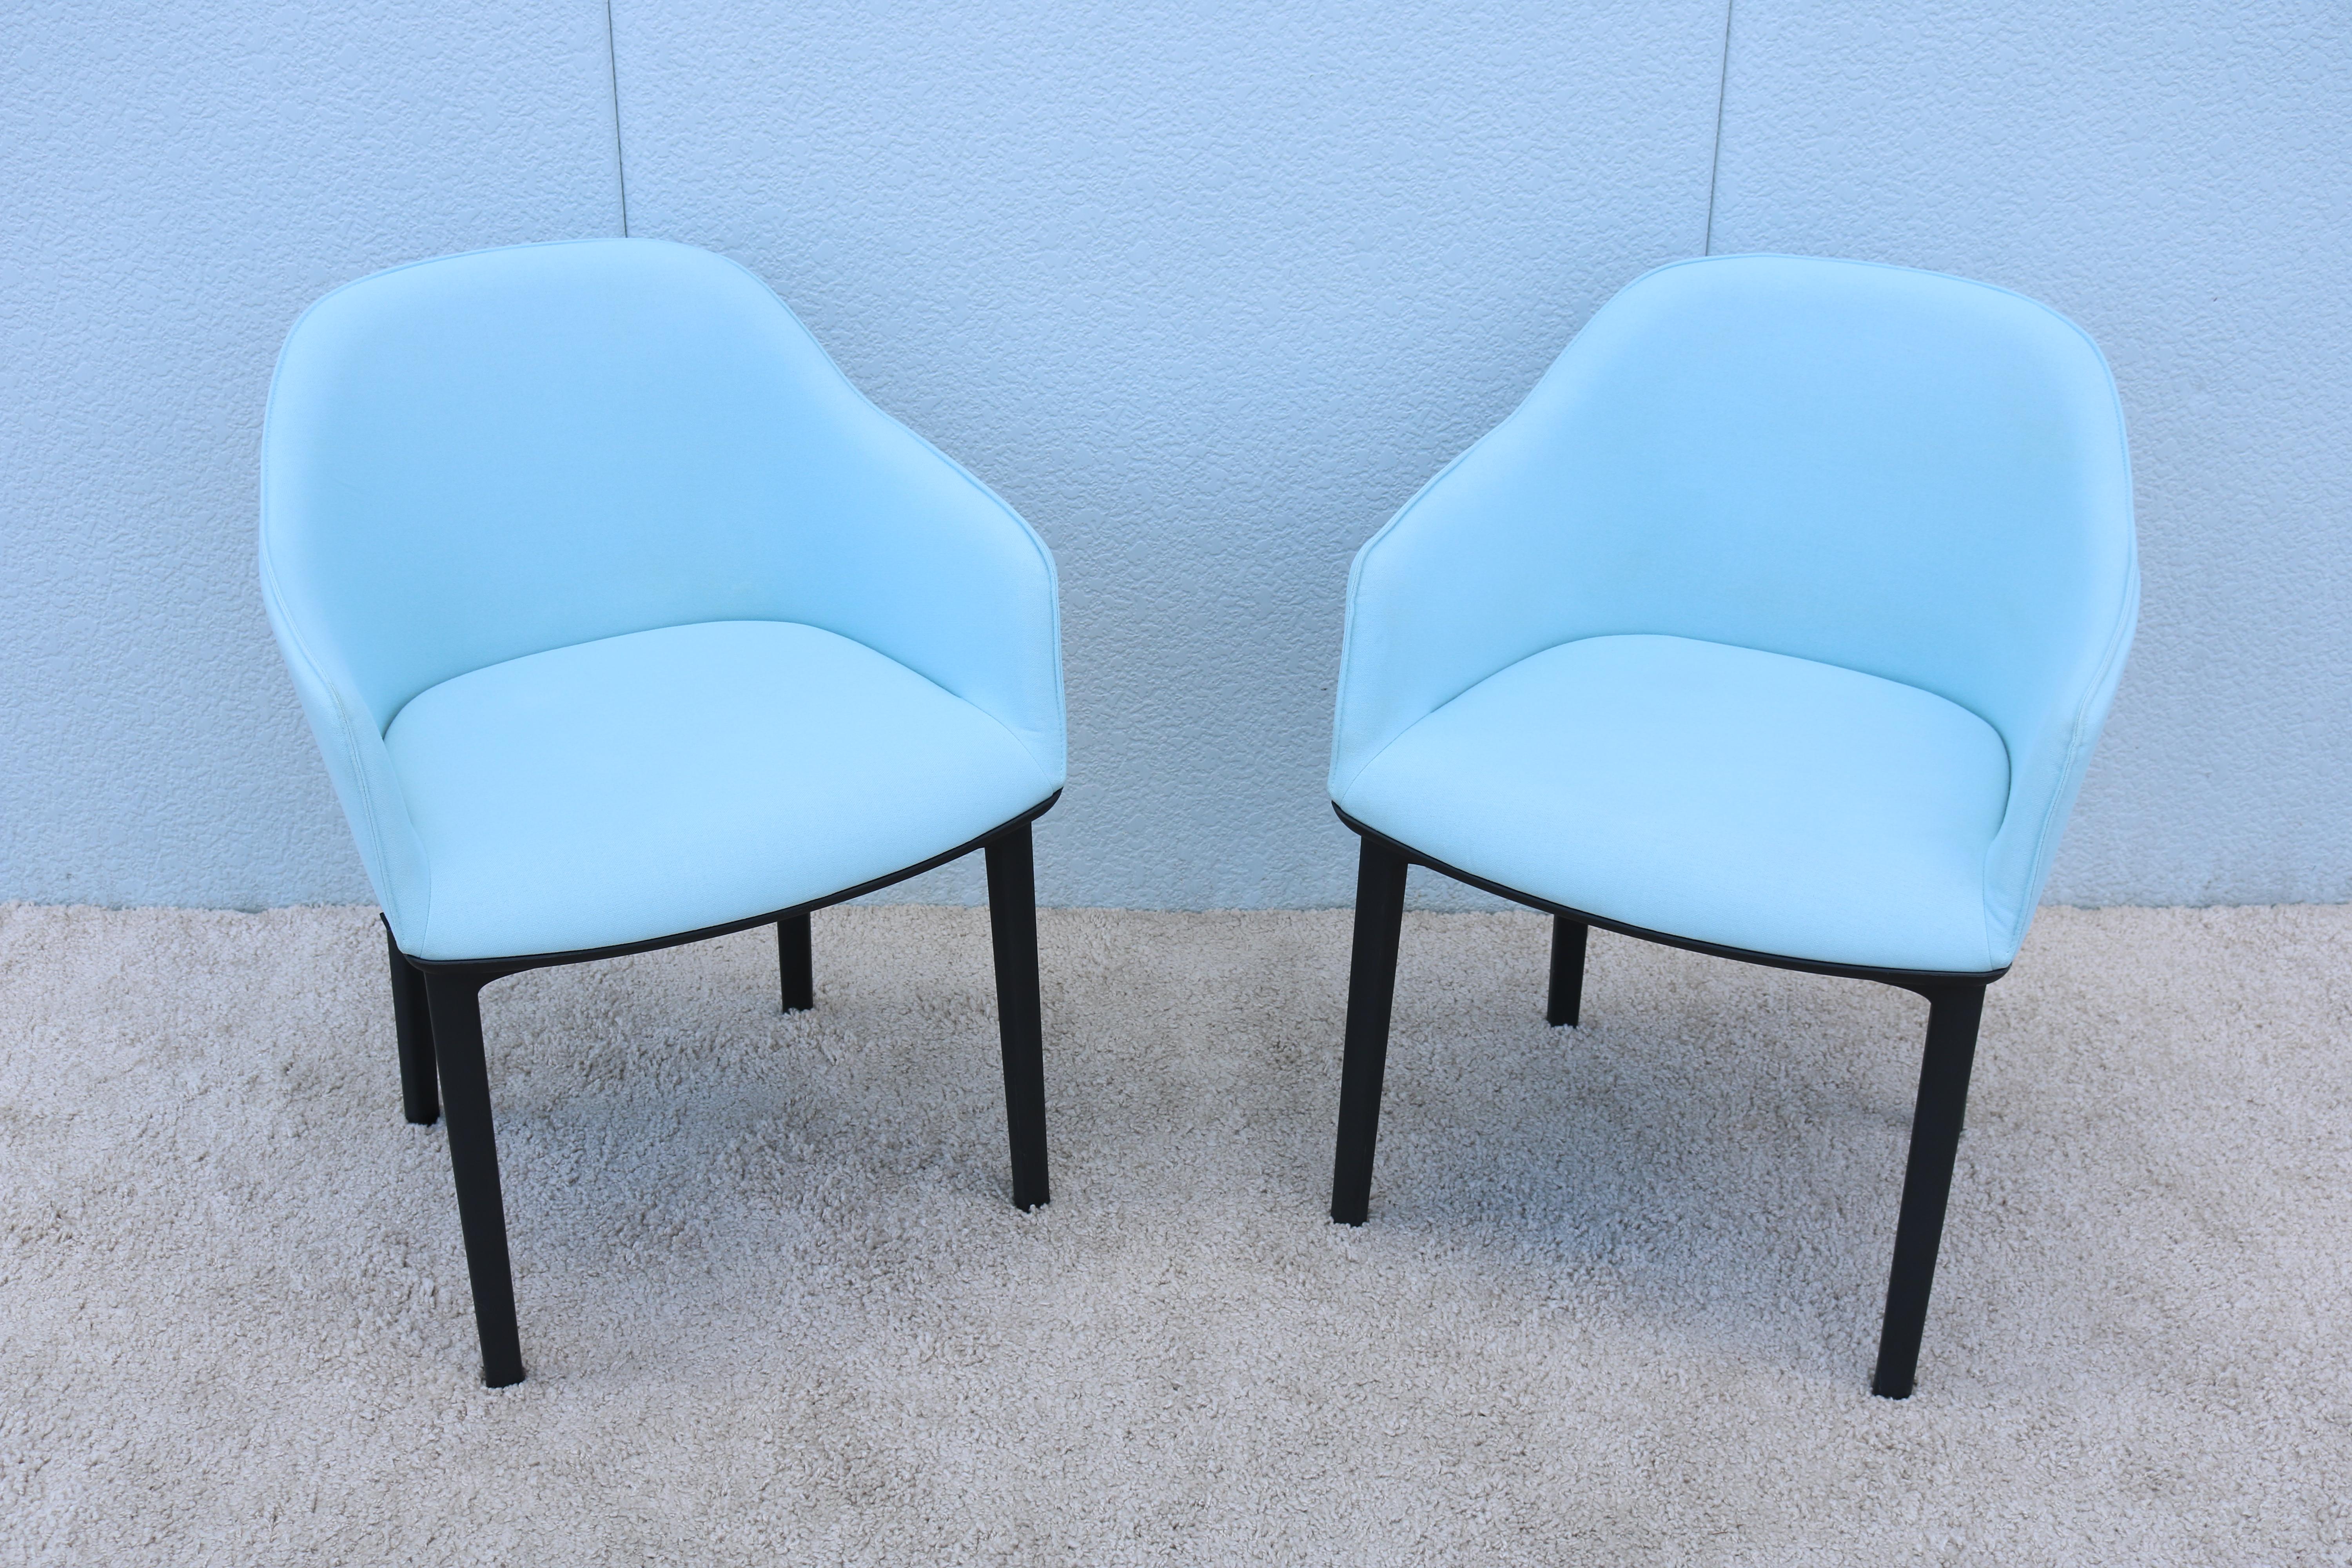 German Modern Ronan and Erwan Bouroullec for Vitra Ice Blue Softshell Chairs, a Pair For Sale